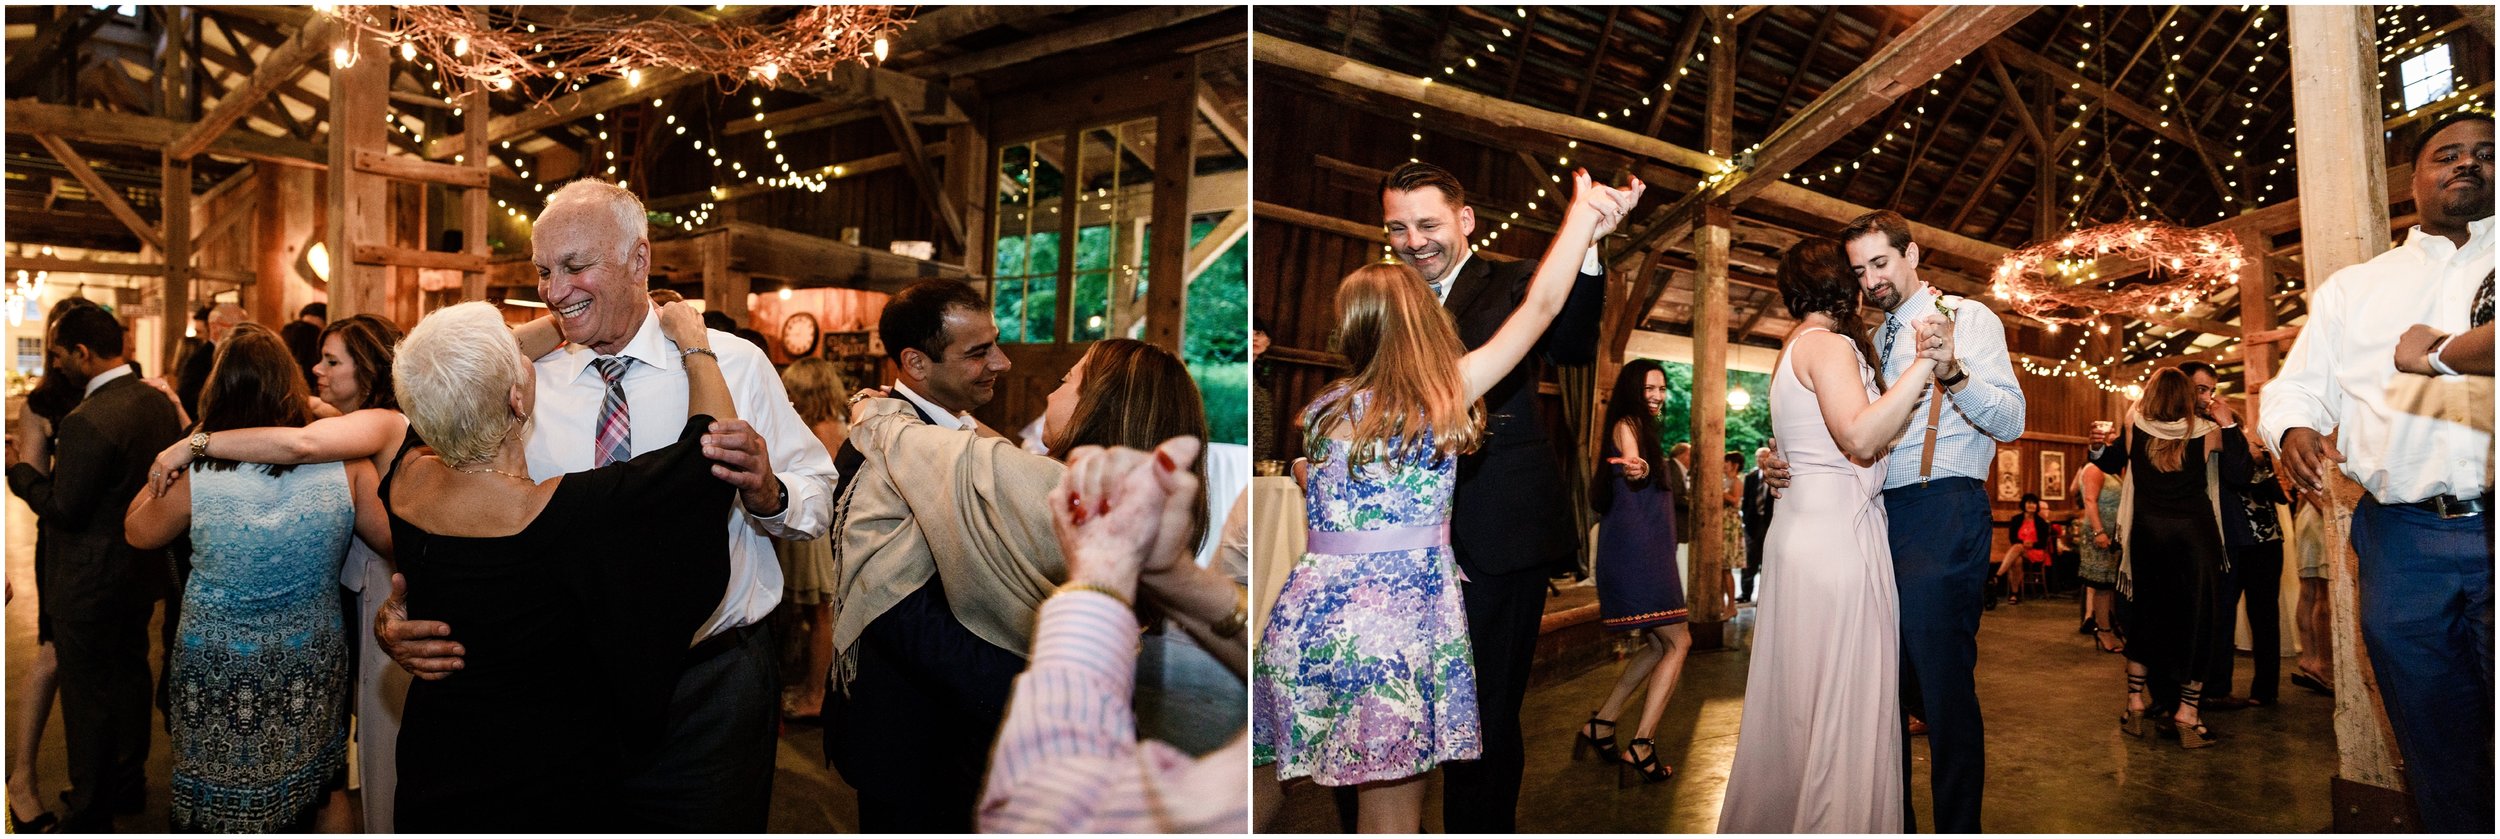 couple dancings during wedding reception